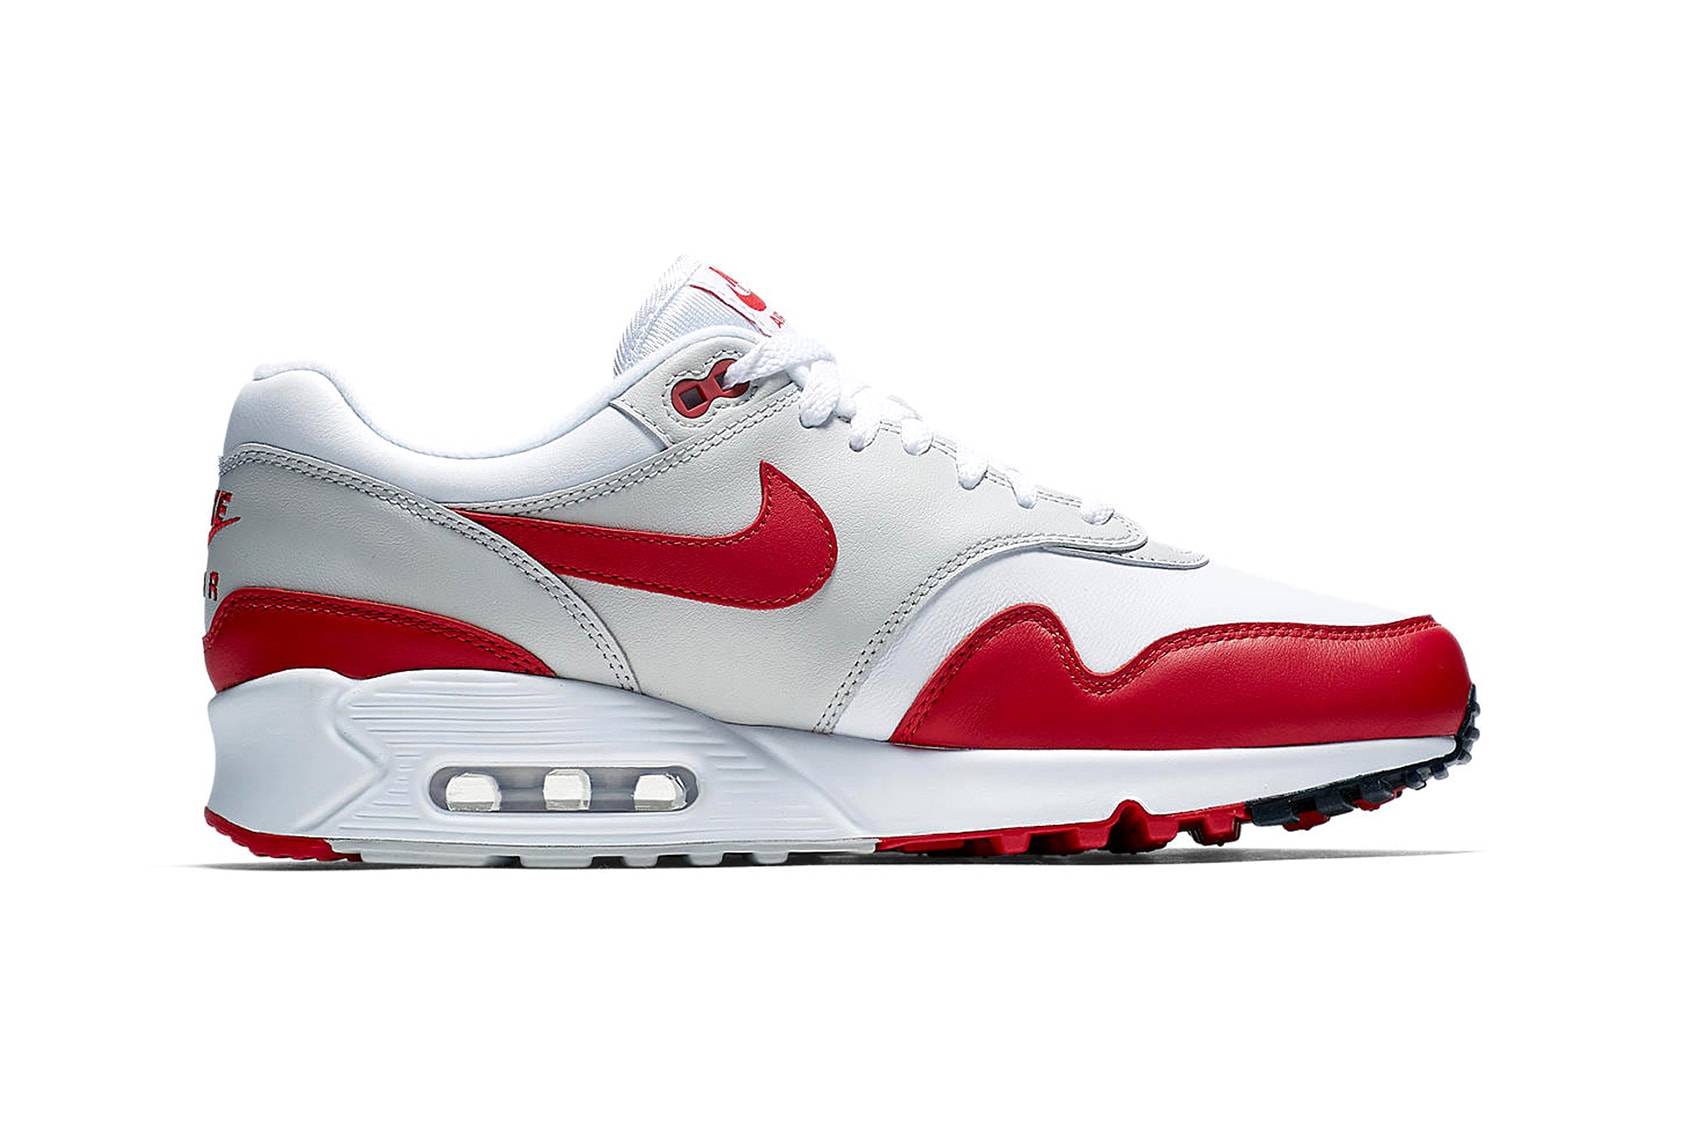 Nike Air Max 1 x 90 Hybrid White Red Colorway Closer Look Release Date Details Cop Purchase Buy Now Raffle Kicks Shoes Trainers Sneakers